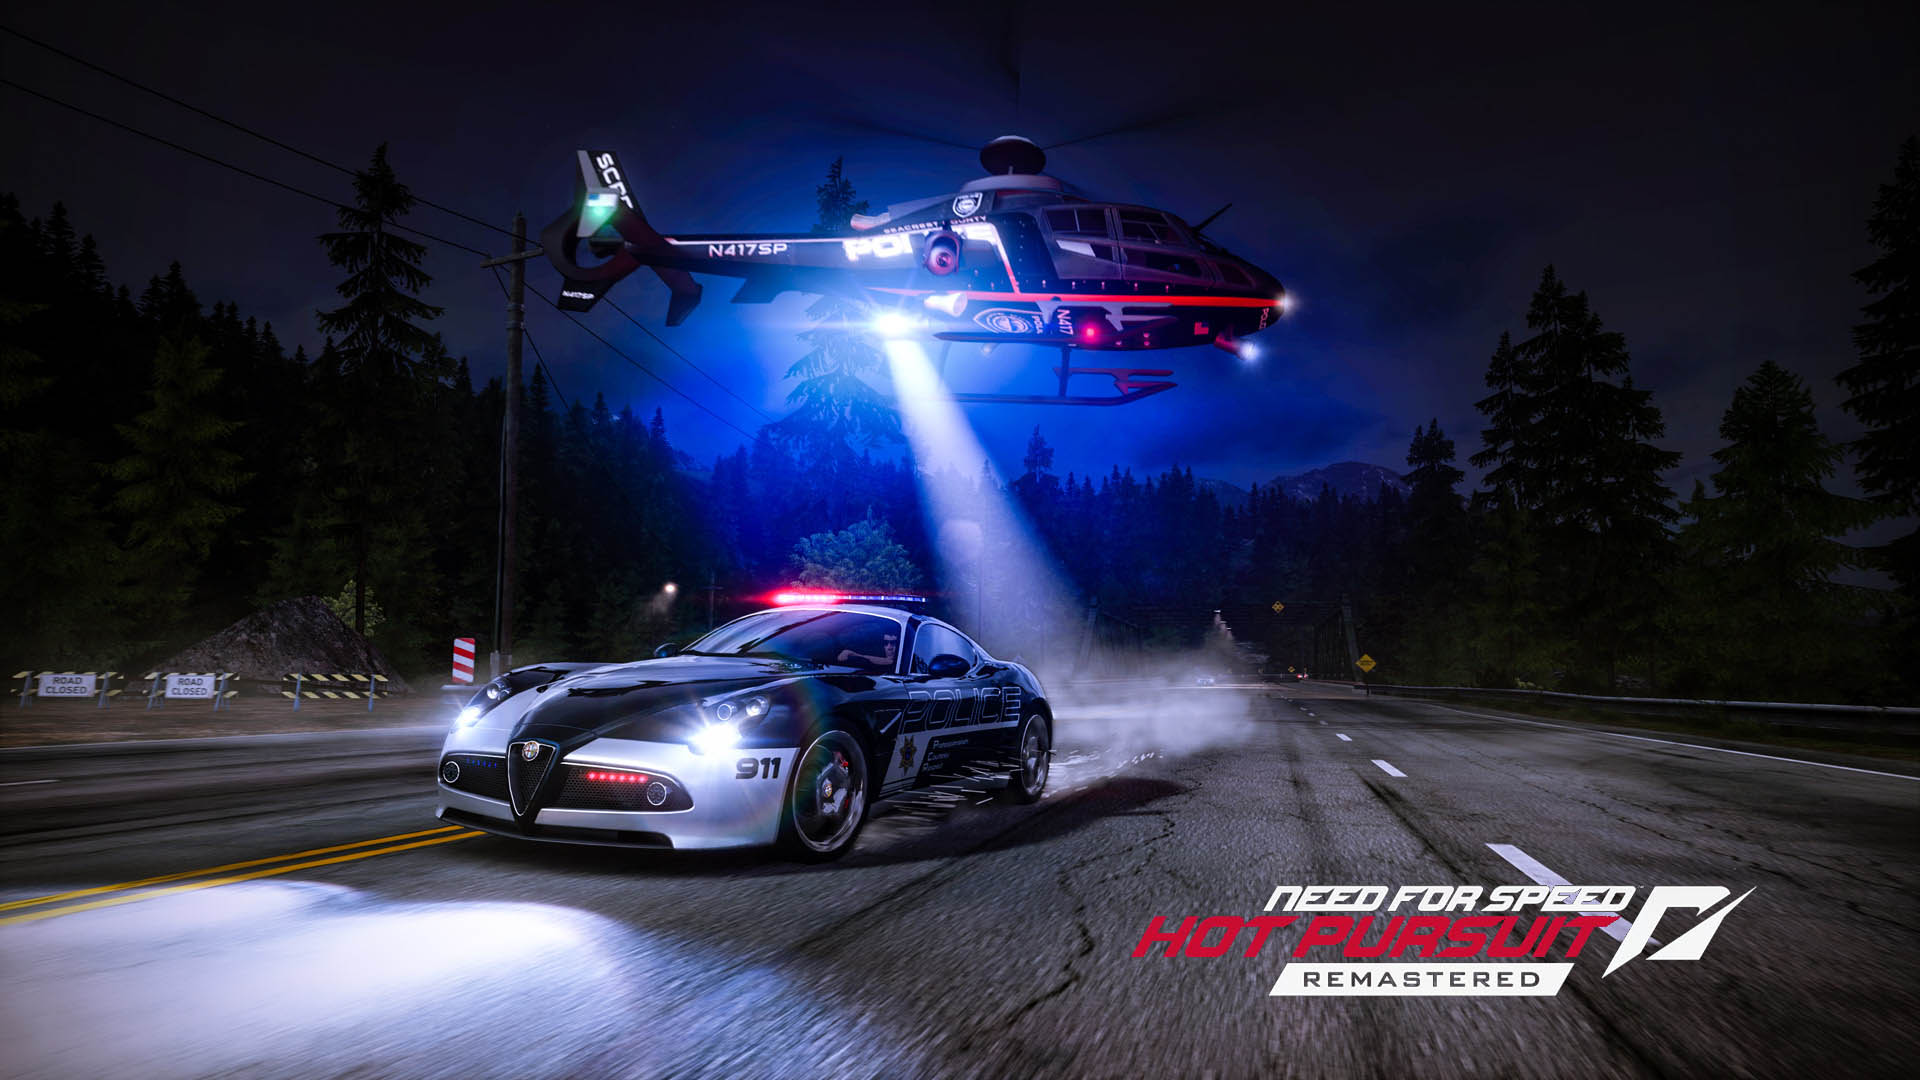 Why doesn't Need for Speed make a remastered version of NFS Most